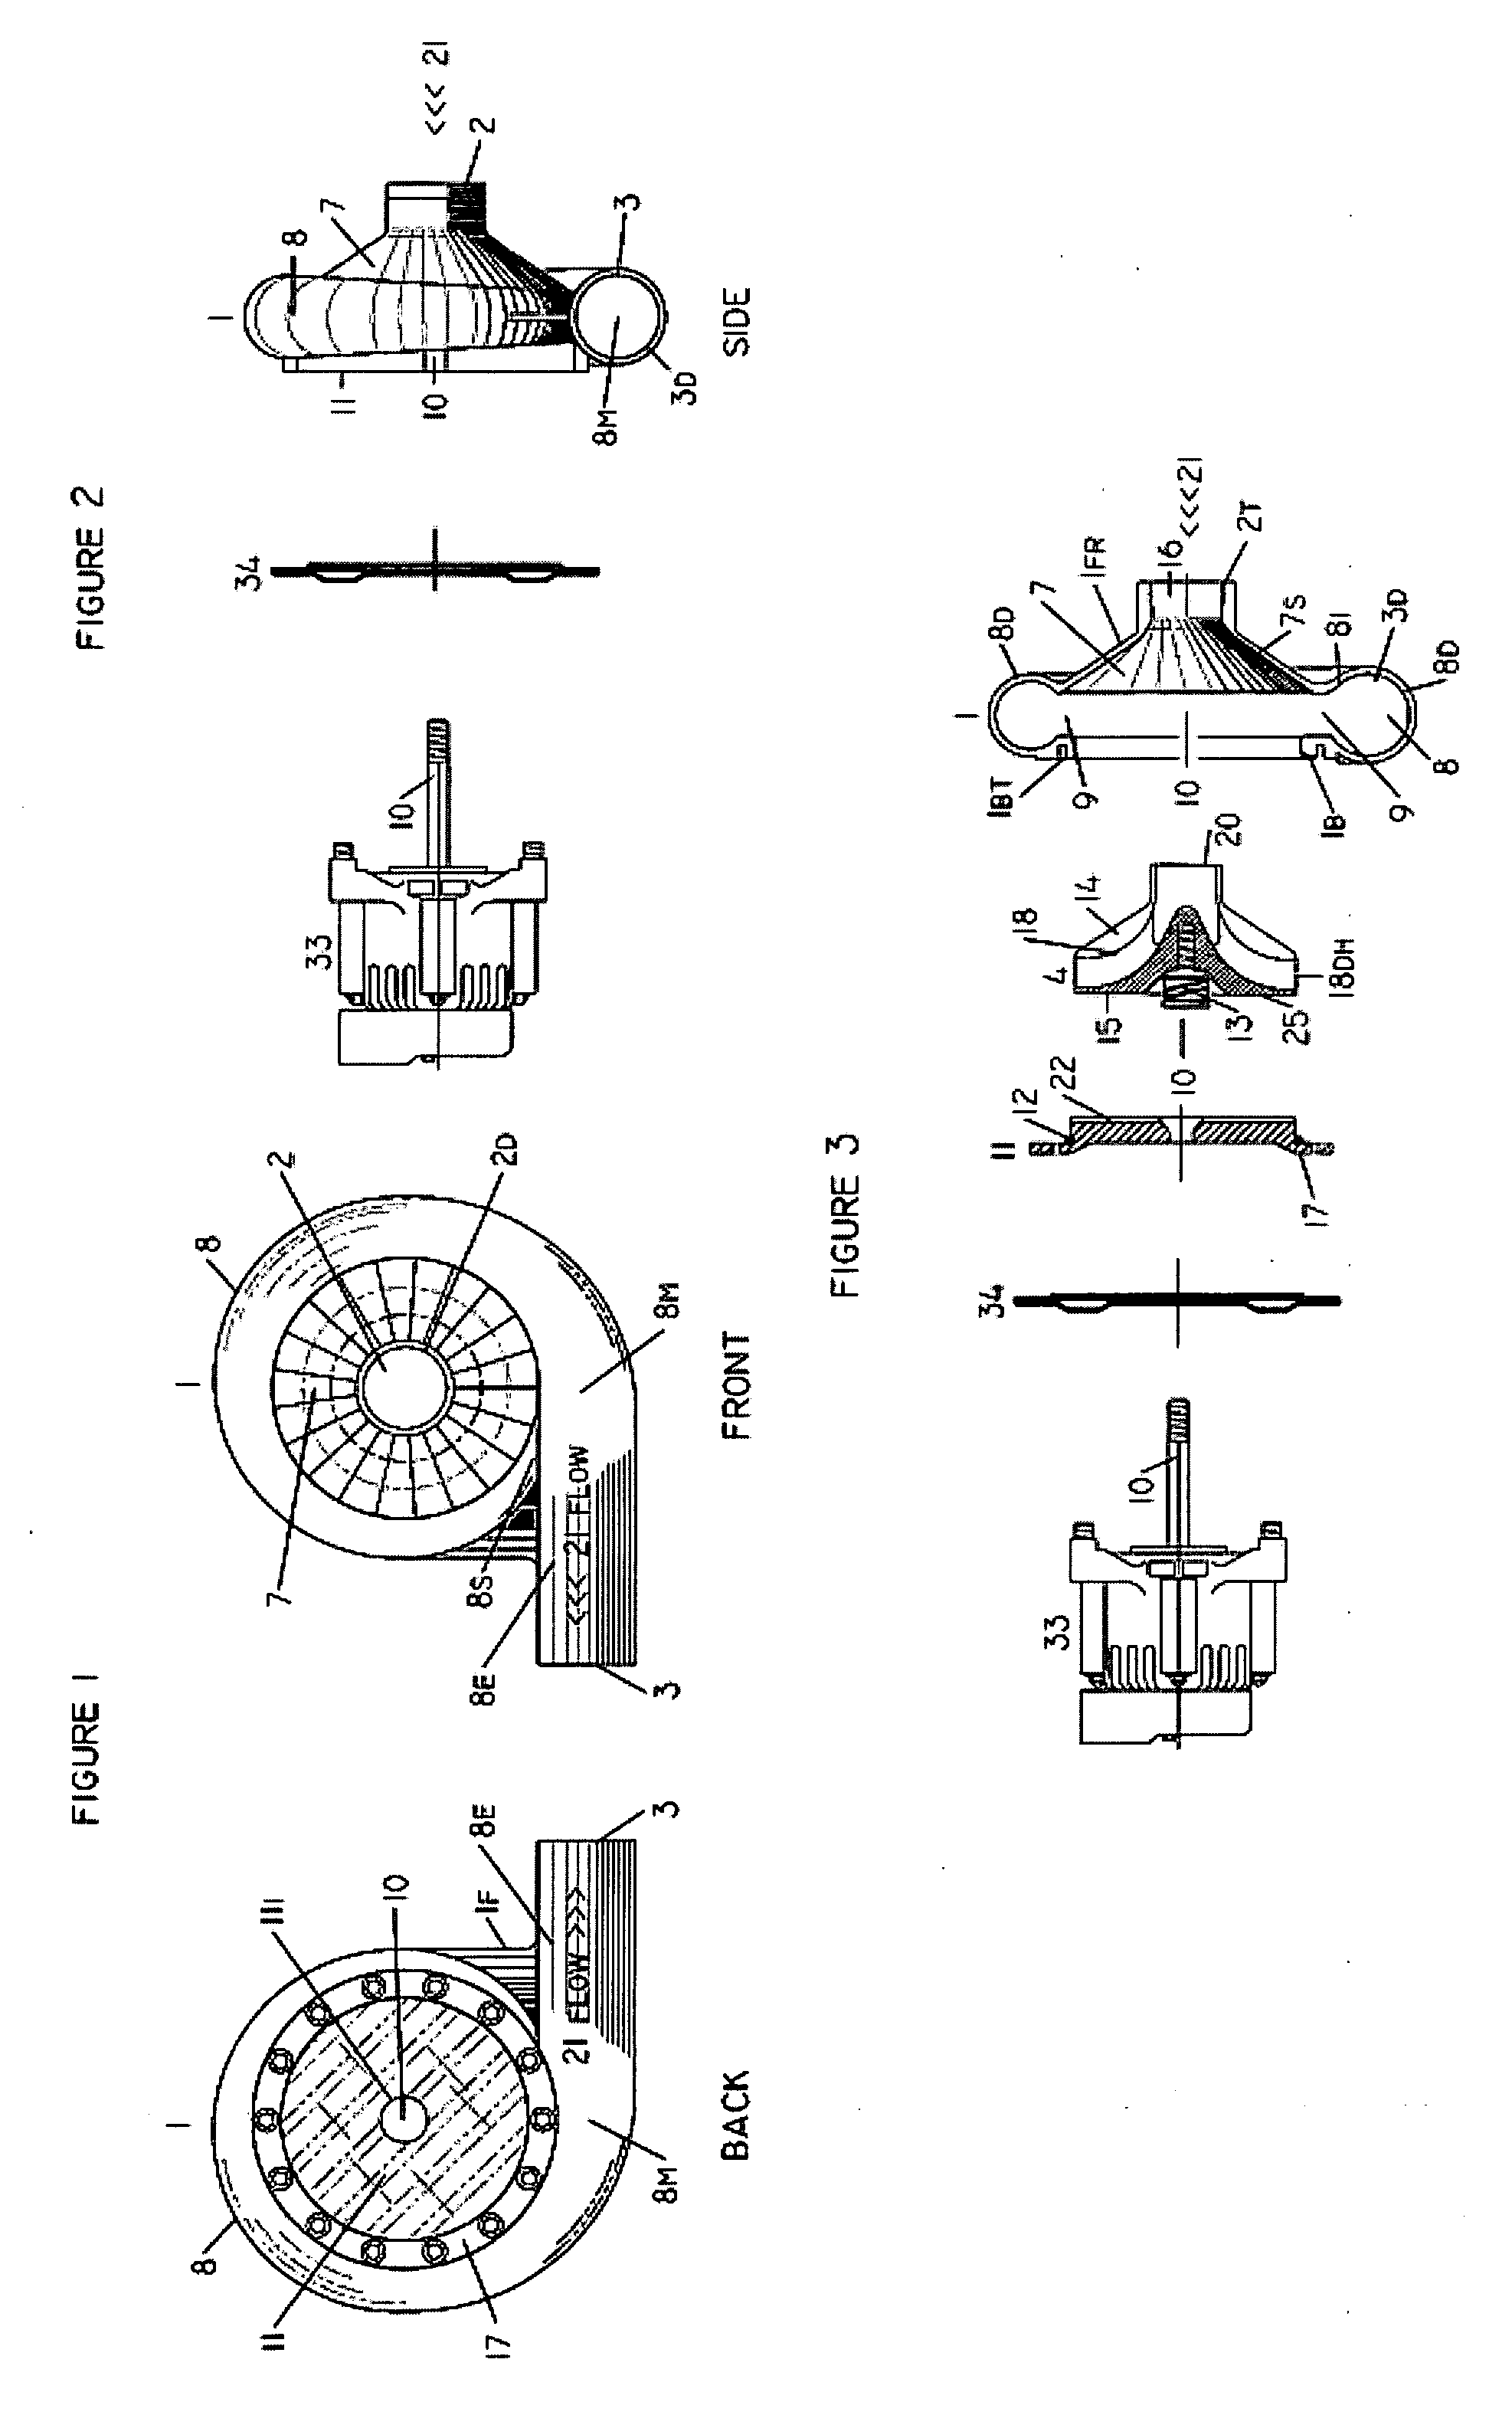 Reduced Pressure Differential Hydroelectric Turbine System